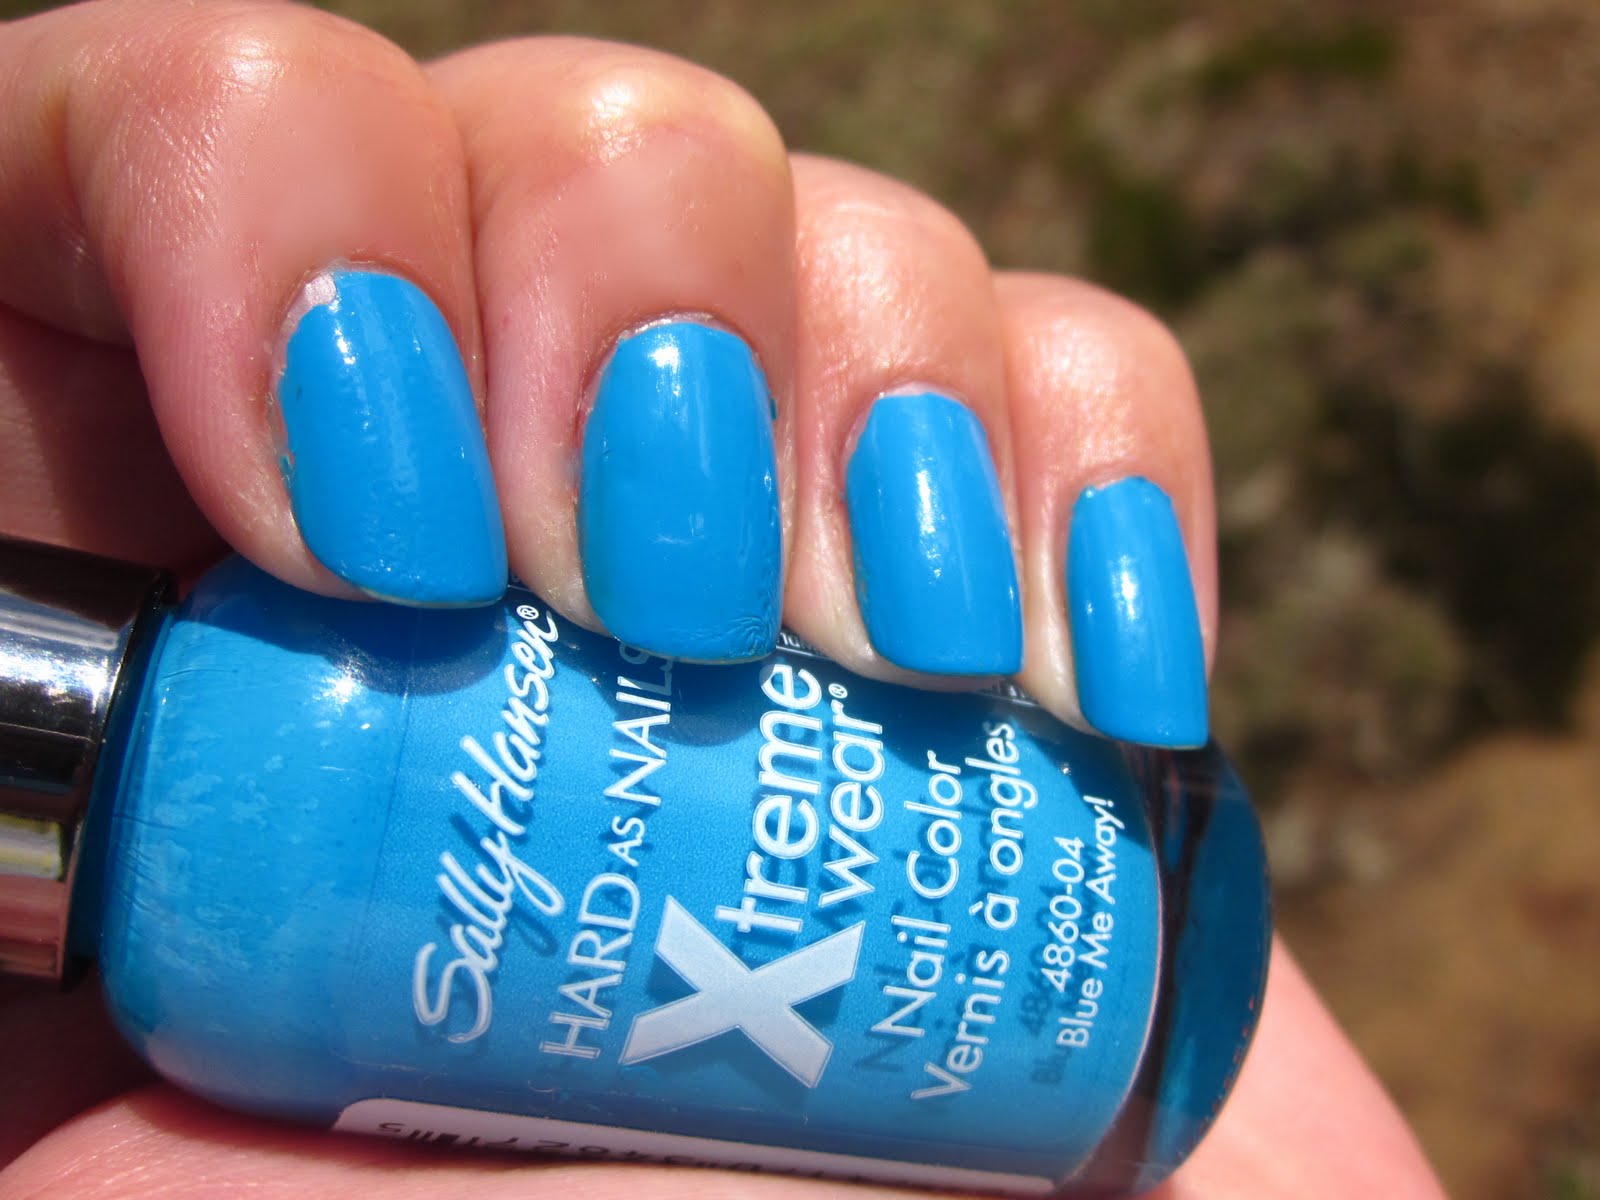 9. Sally Hansen Hard as Nails Xtreme Wear in "Blue Me Away!" - wide 7